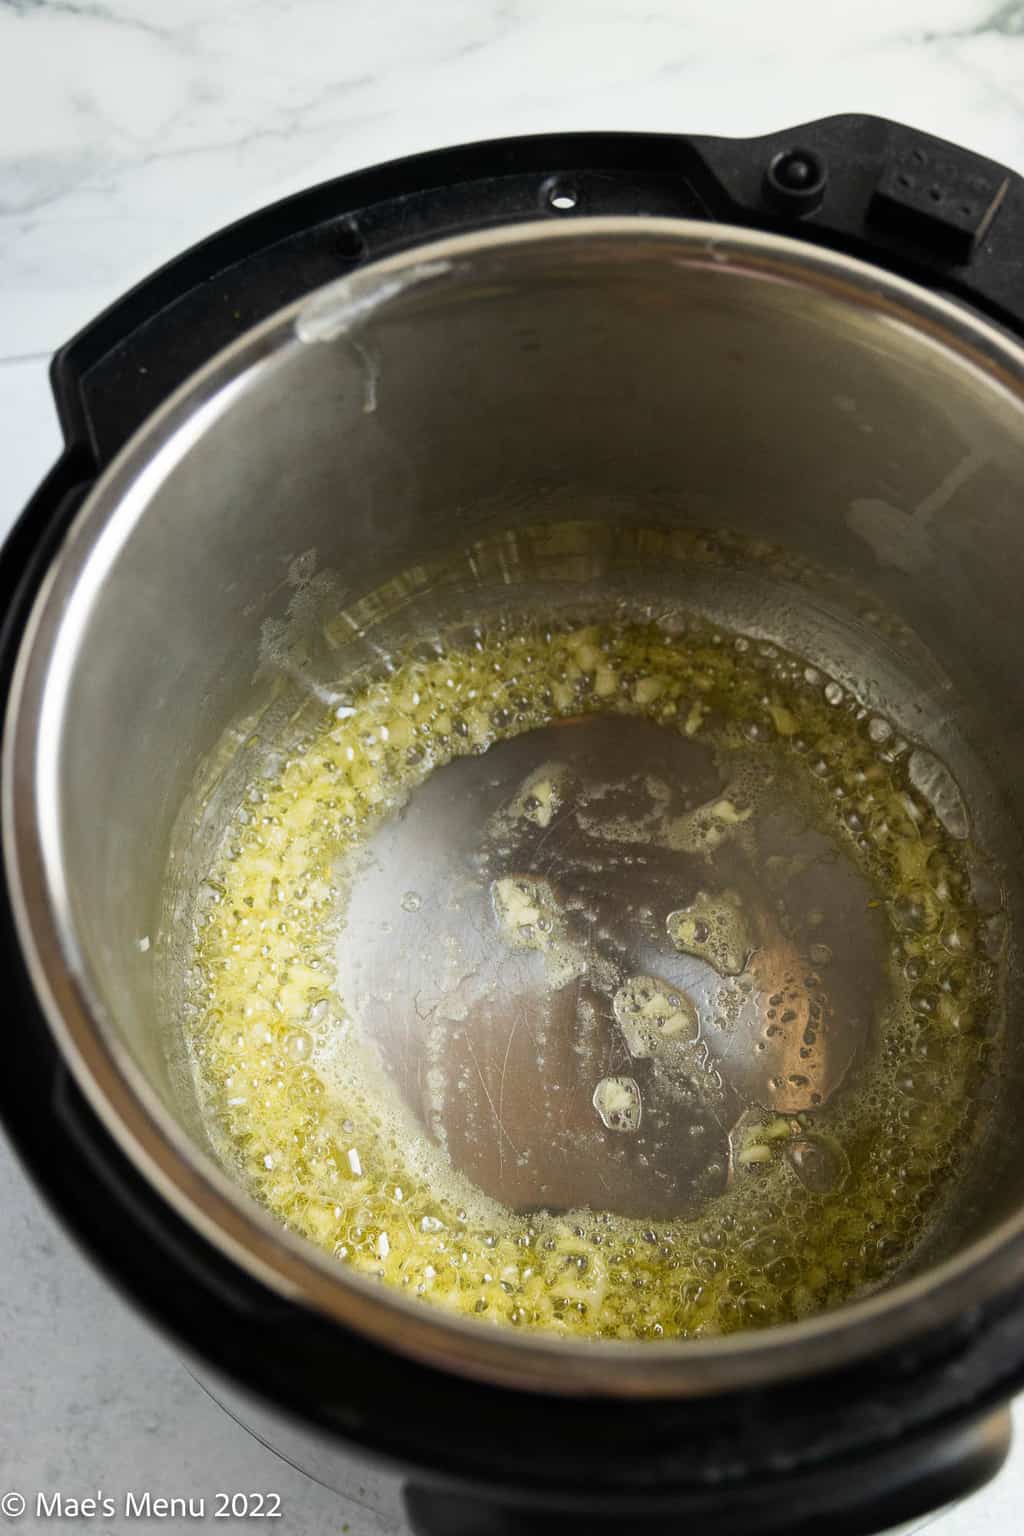 Minced garlic sauteing in garlic and olive oil.